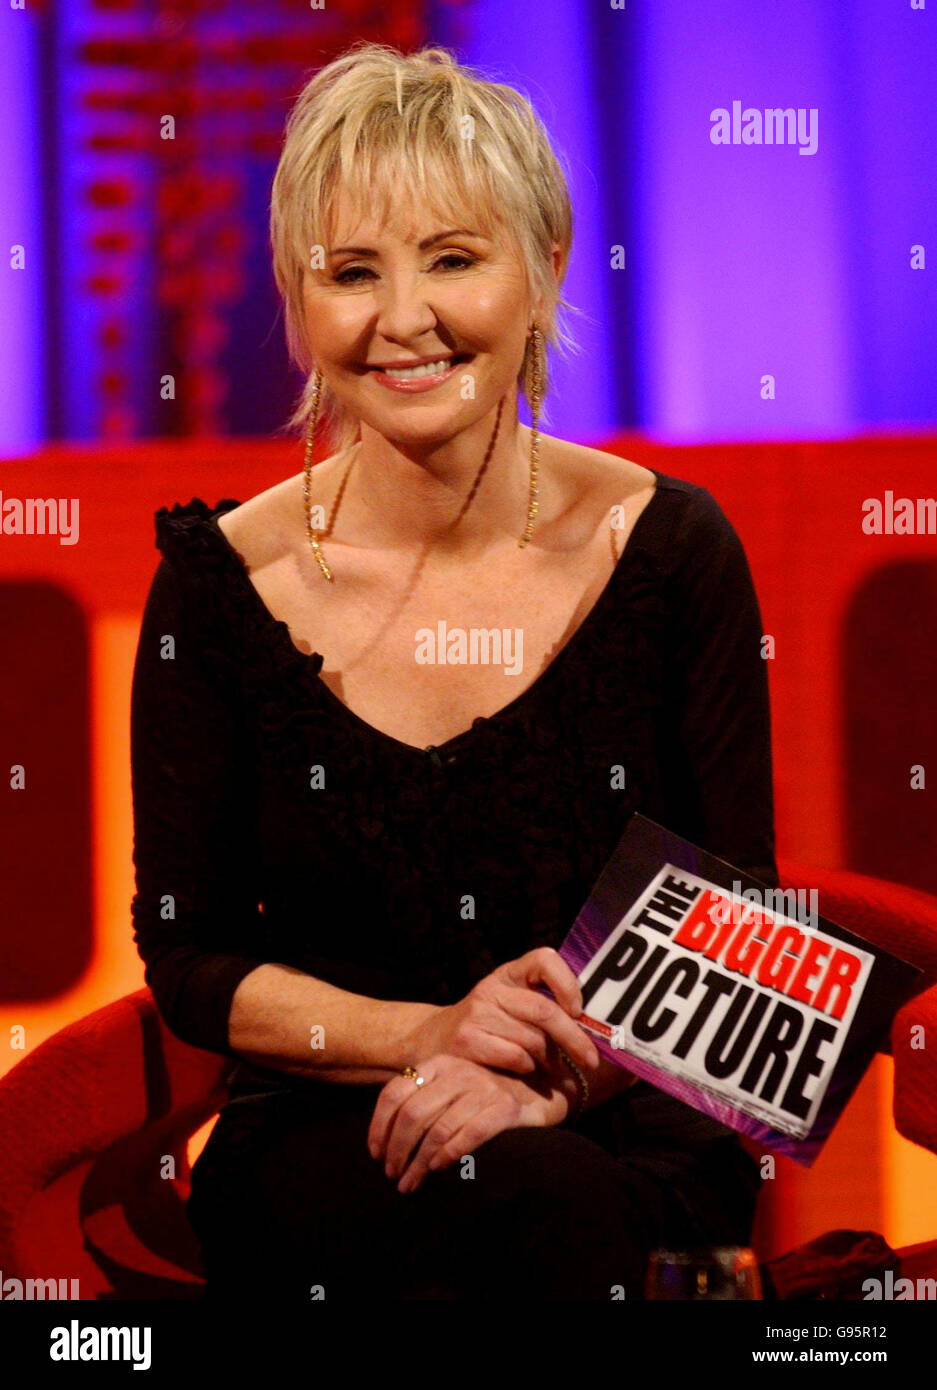 Lulu during her guest appearance on Graham Nortons' 'The Bigger Picture' show, at the LWT studio, central London, Monday 27 February 2006. PRESS ASSOCIATION Photo. Photo credit should read: Anthony Harvey/PA Stock Photo